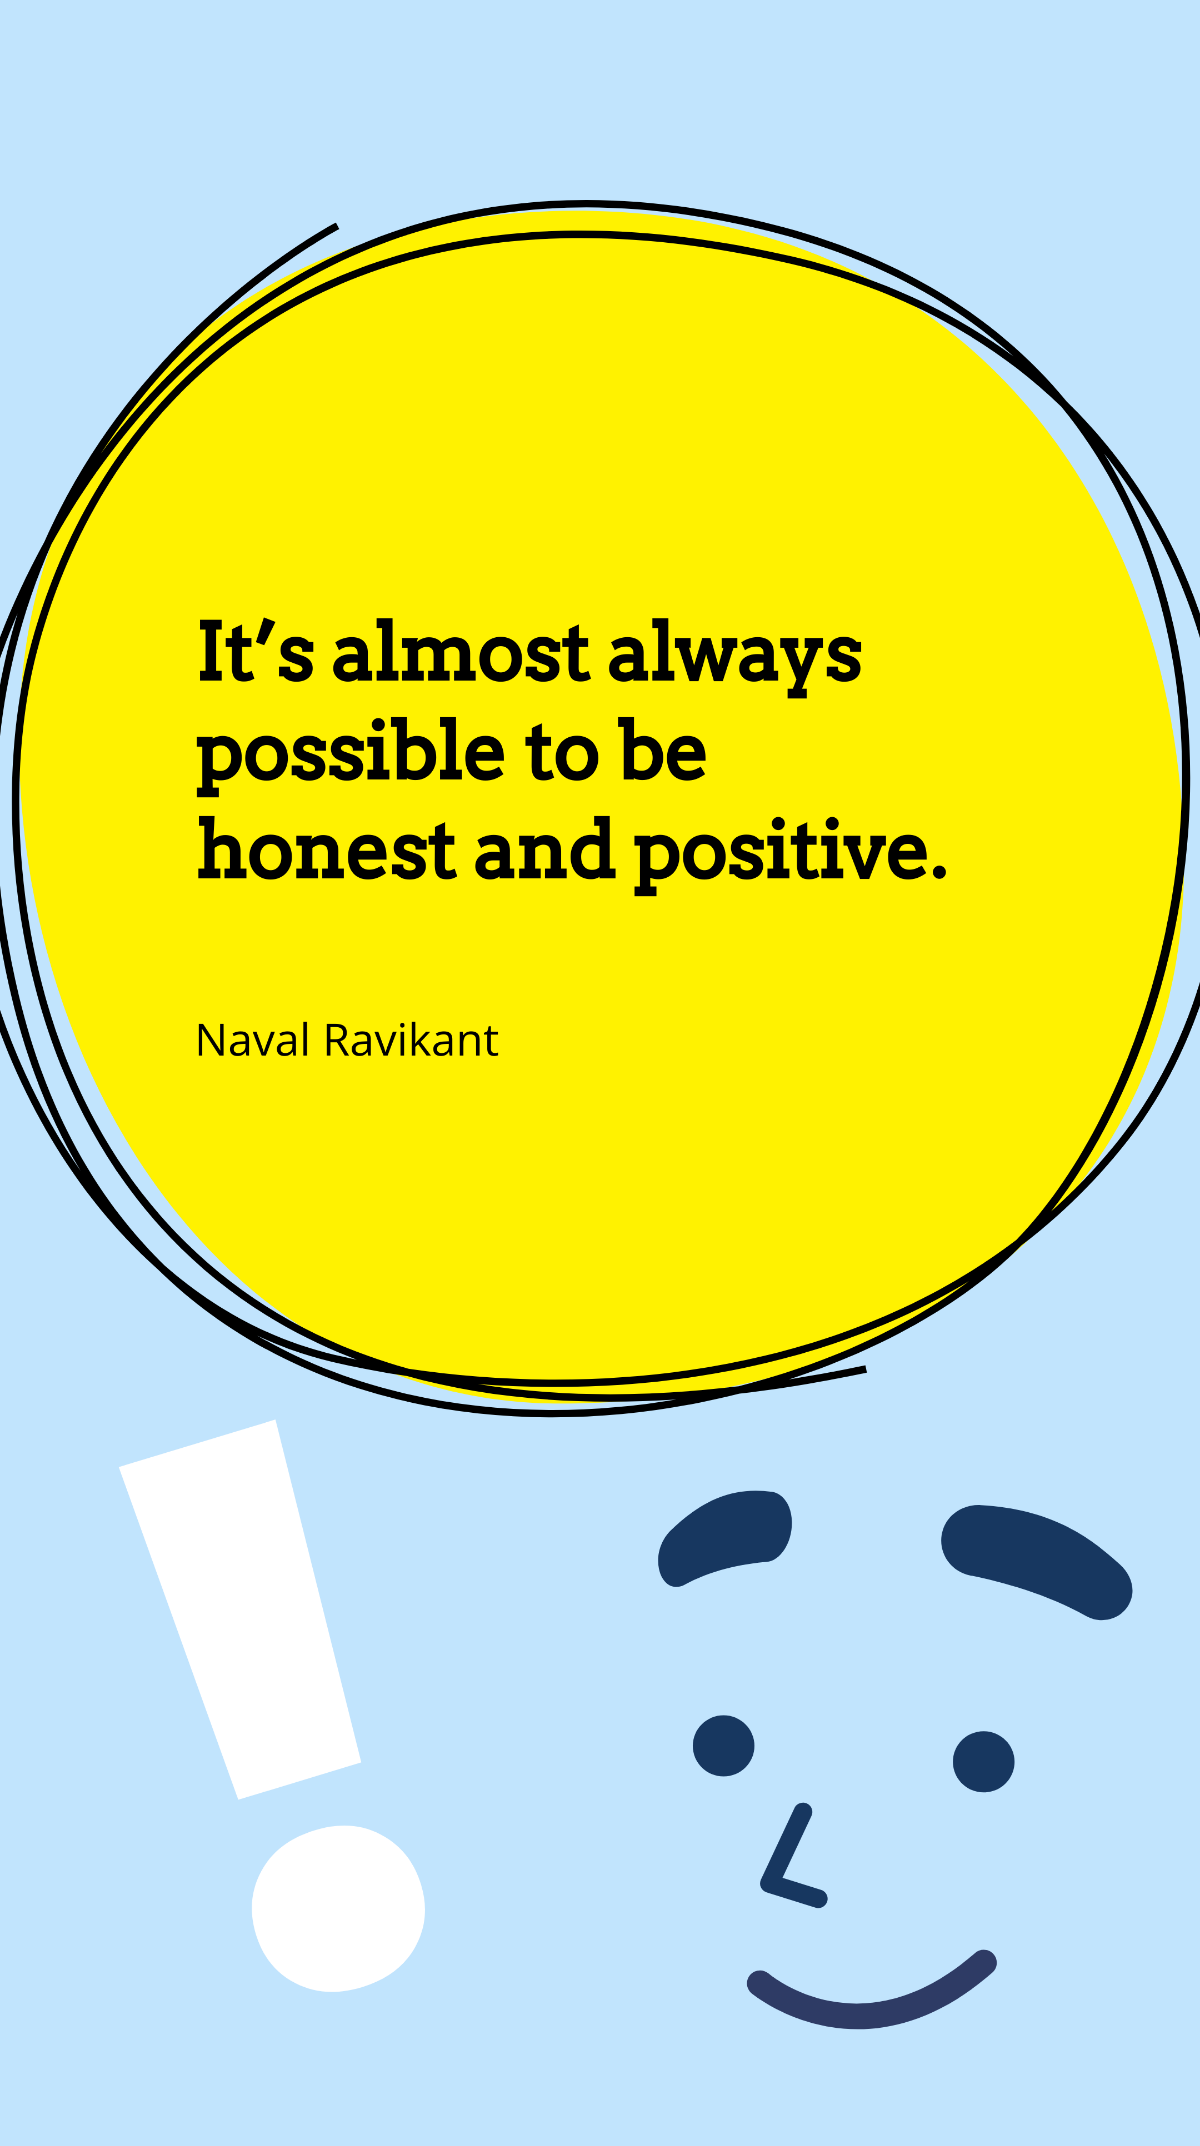 Naval Ravikant - It’s almost always possible to be honest and positive. Template